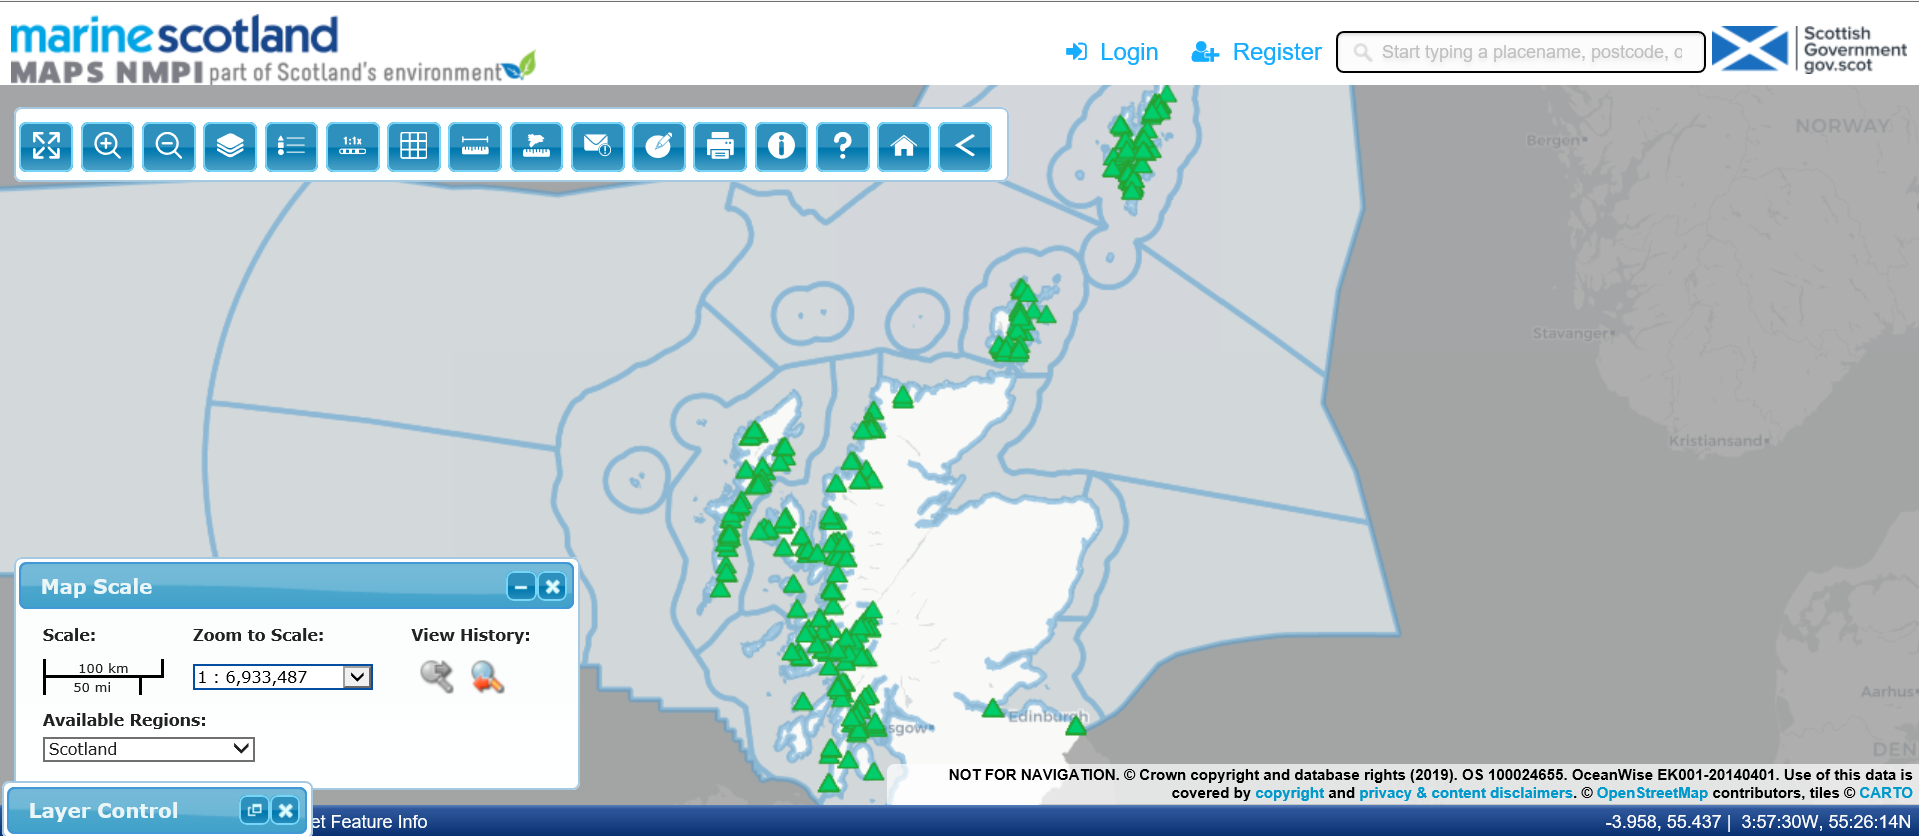 Active marine finfish sites (March 2020) obtained using Marine Scotland Maps NMPi